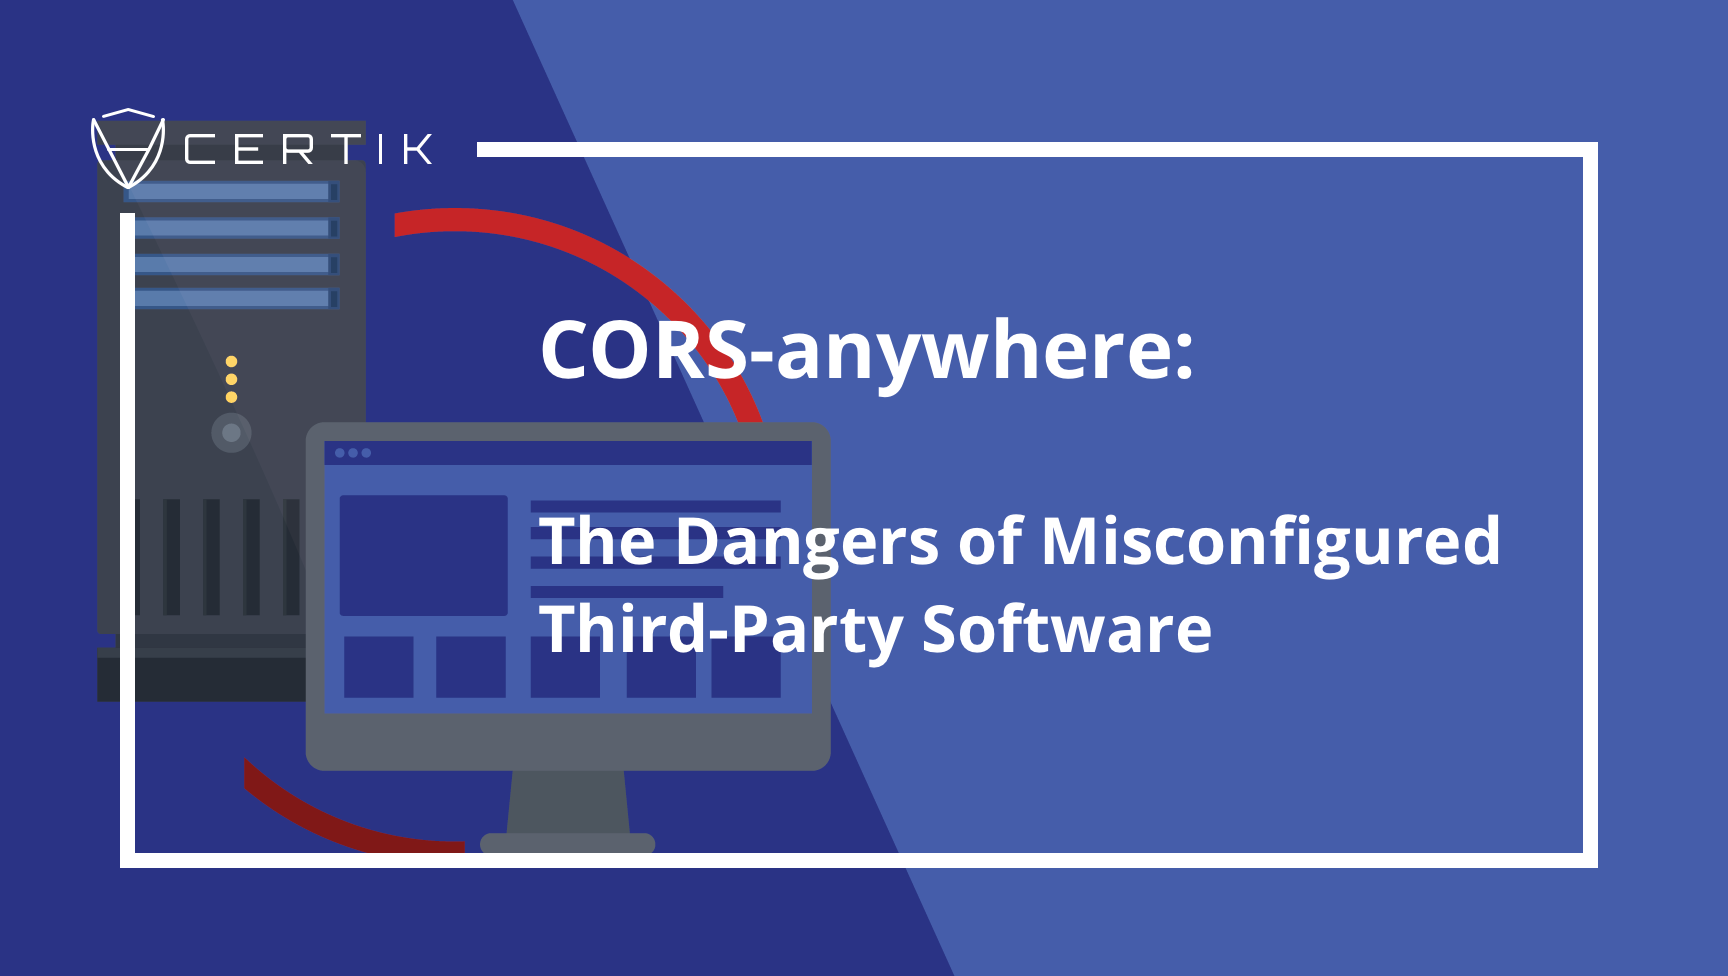 CORS-anywhere: The Dangers of Misconfigured Third-Party Software